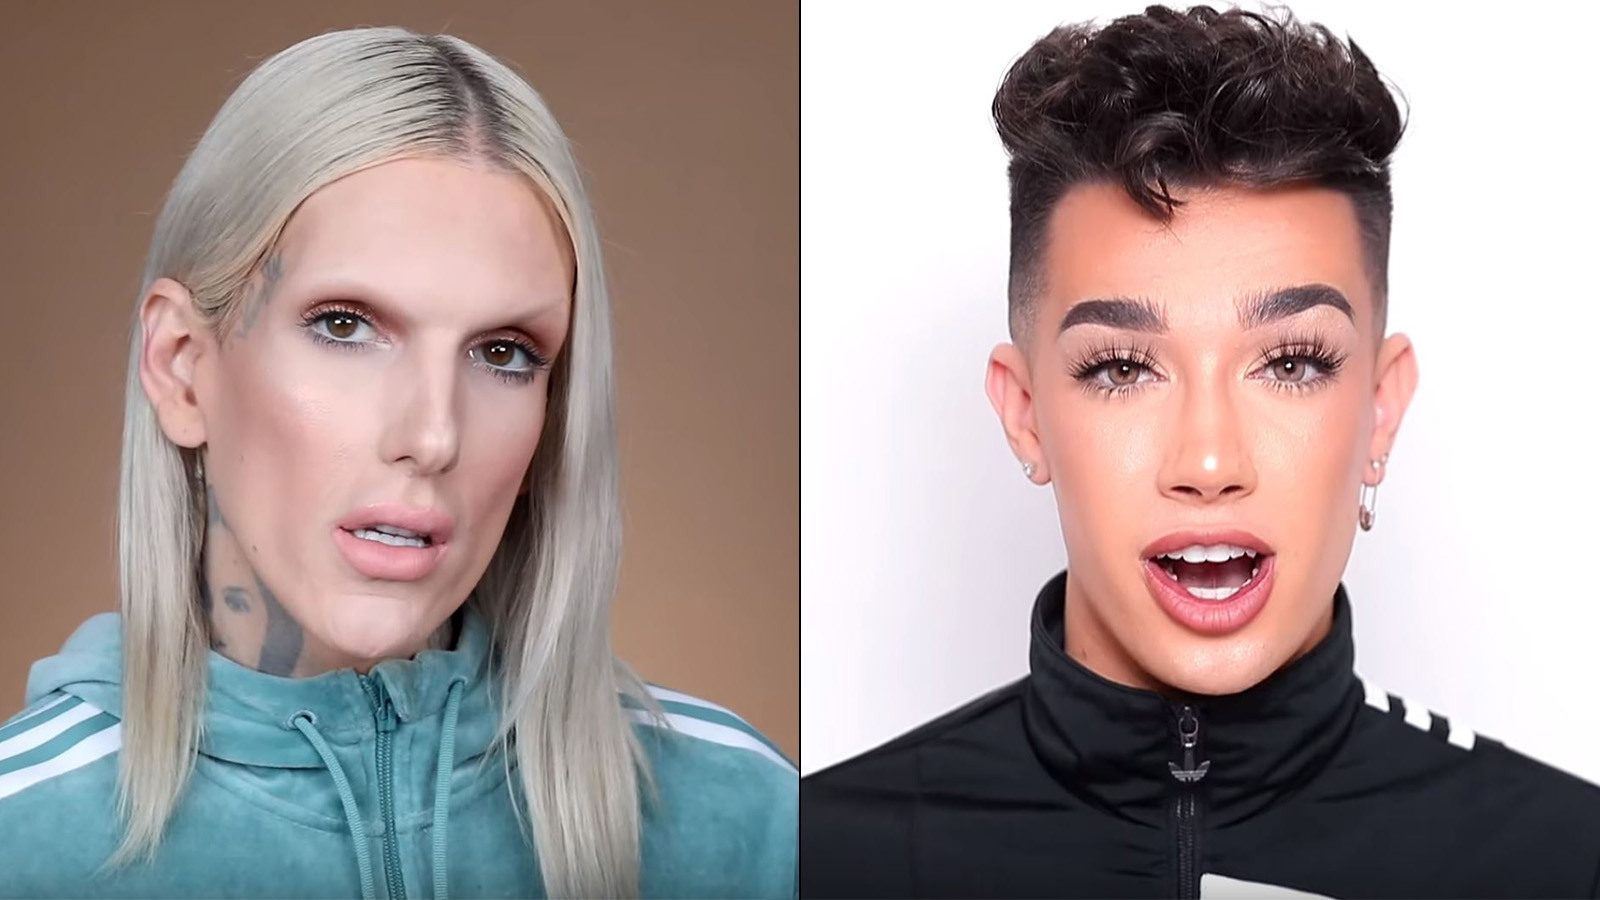 Jeffree star backs down James Charles beef over fear of “exposed” Dexerto